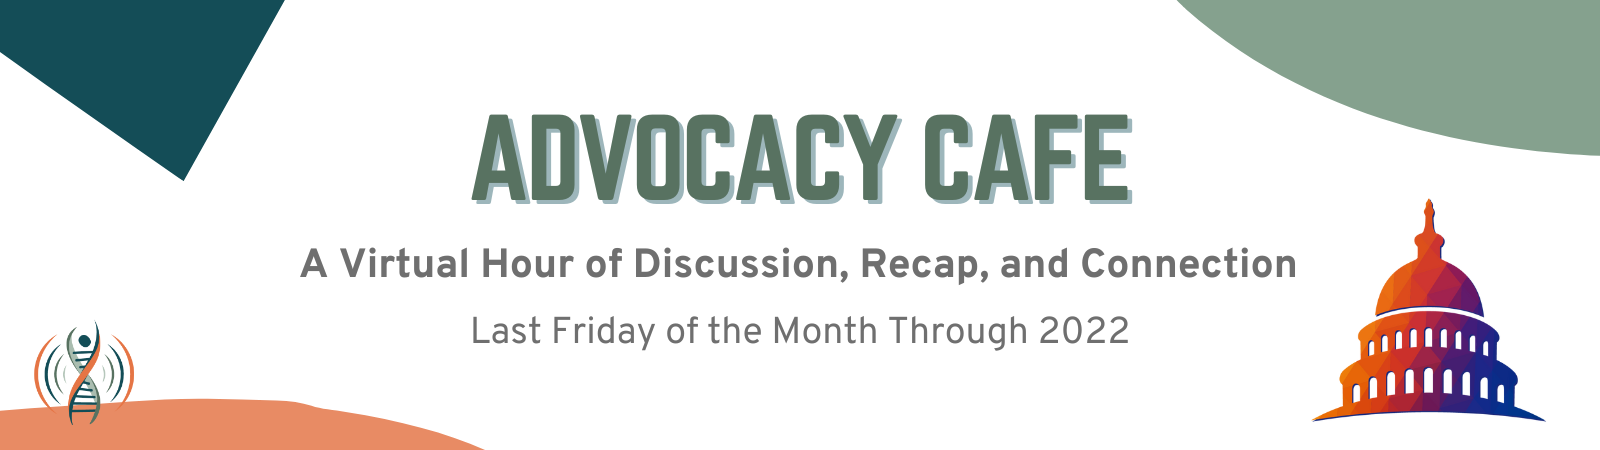 Advocacy Cafe Banner Image